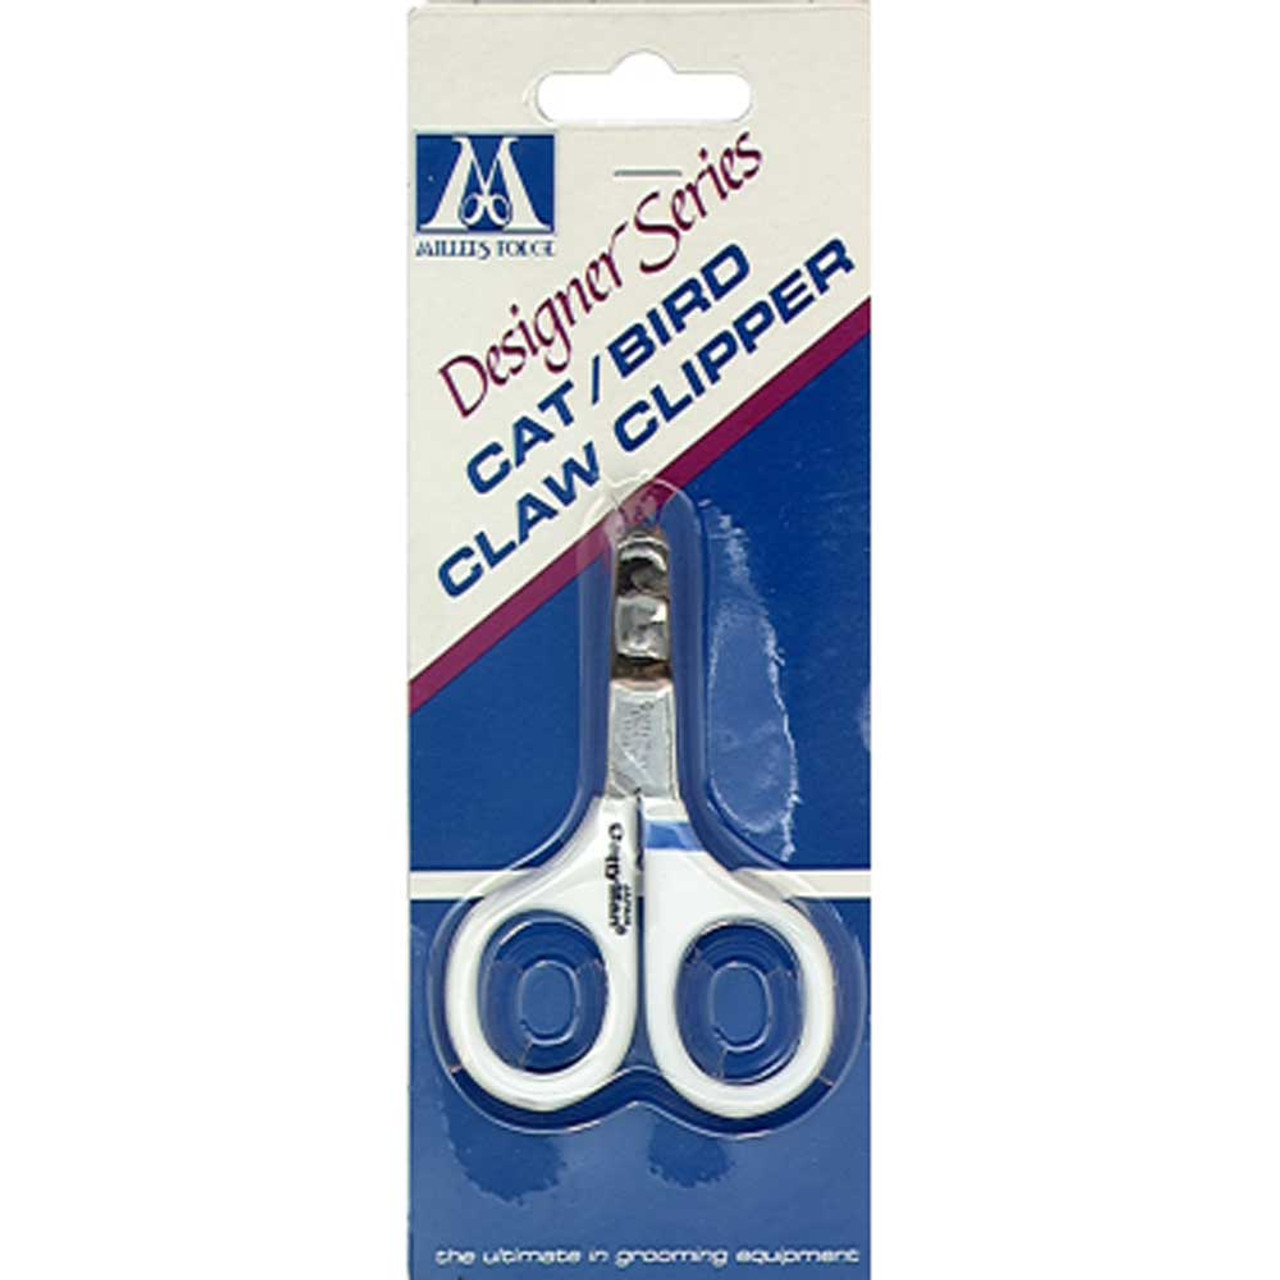 Greenbrier Cat Nail Clippers Trimming Tool Stainless Steel Pet Grooming  Cutter | eBay